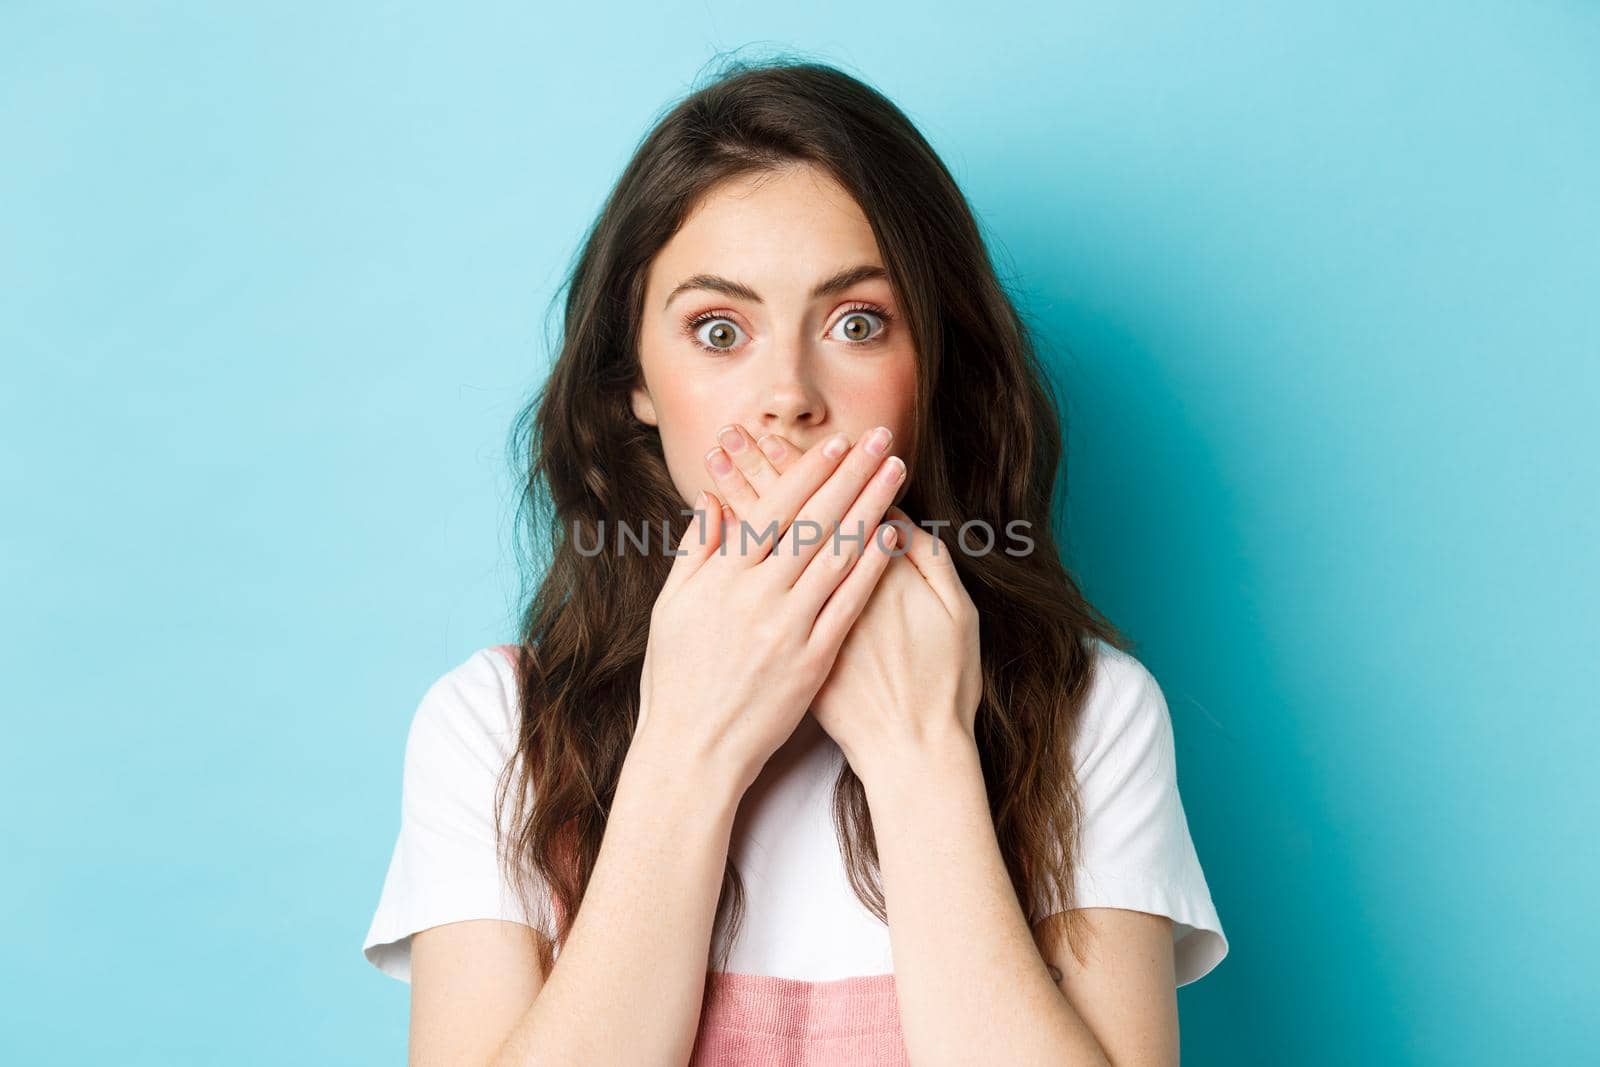 Close up portrait of shocked brunette woman covering hands and stare startled at camera, looking with disbelief and shock, standing against blue background.